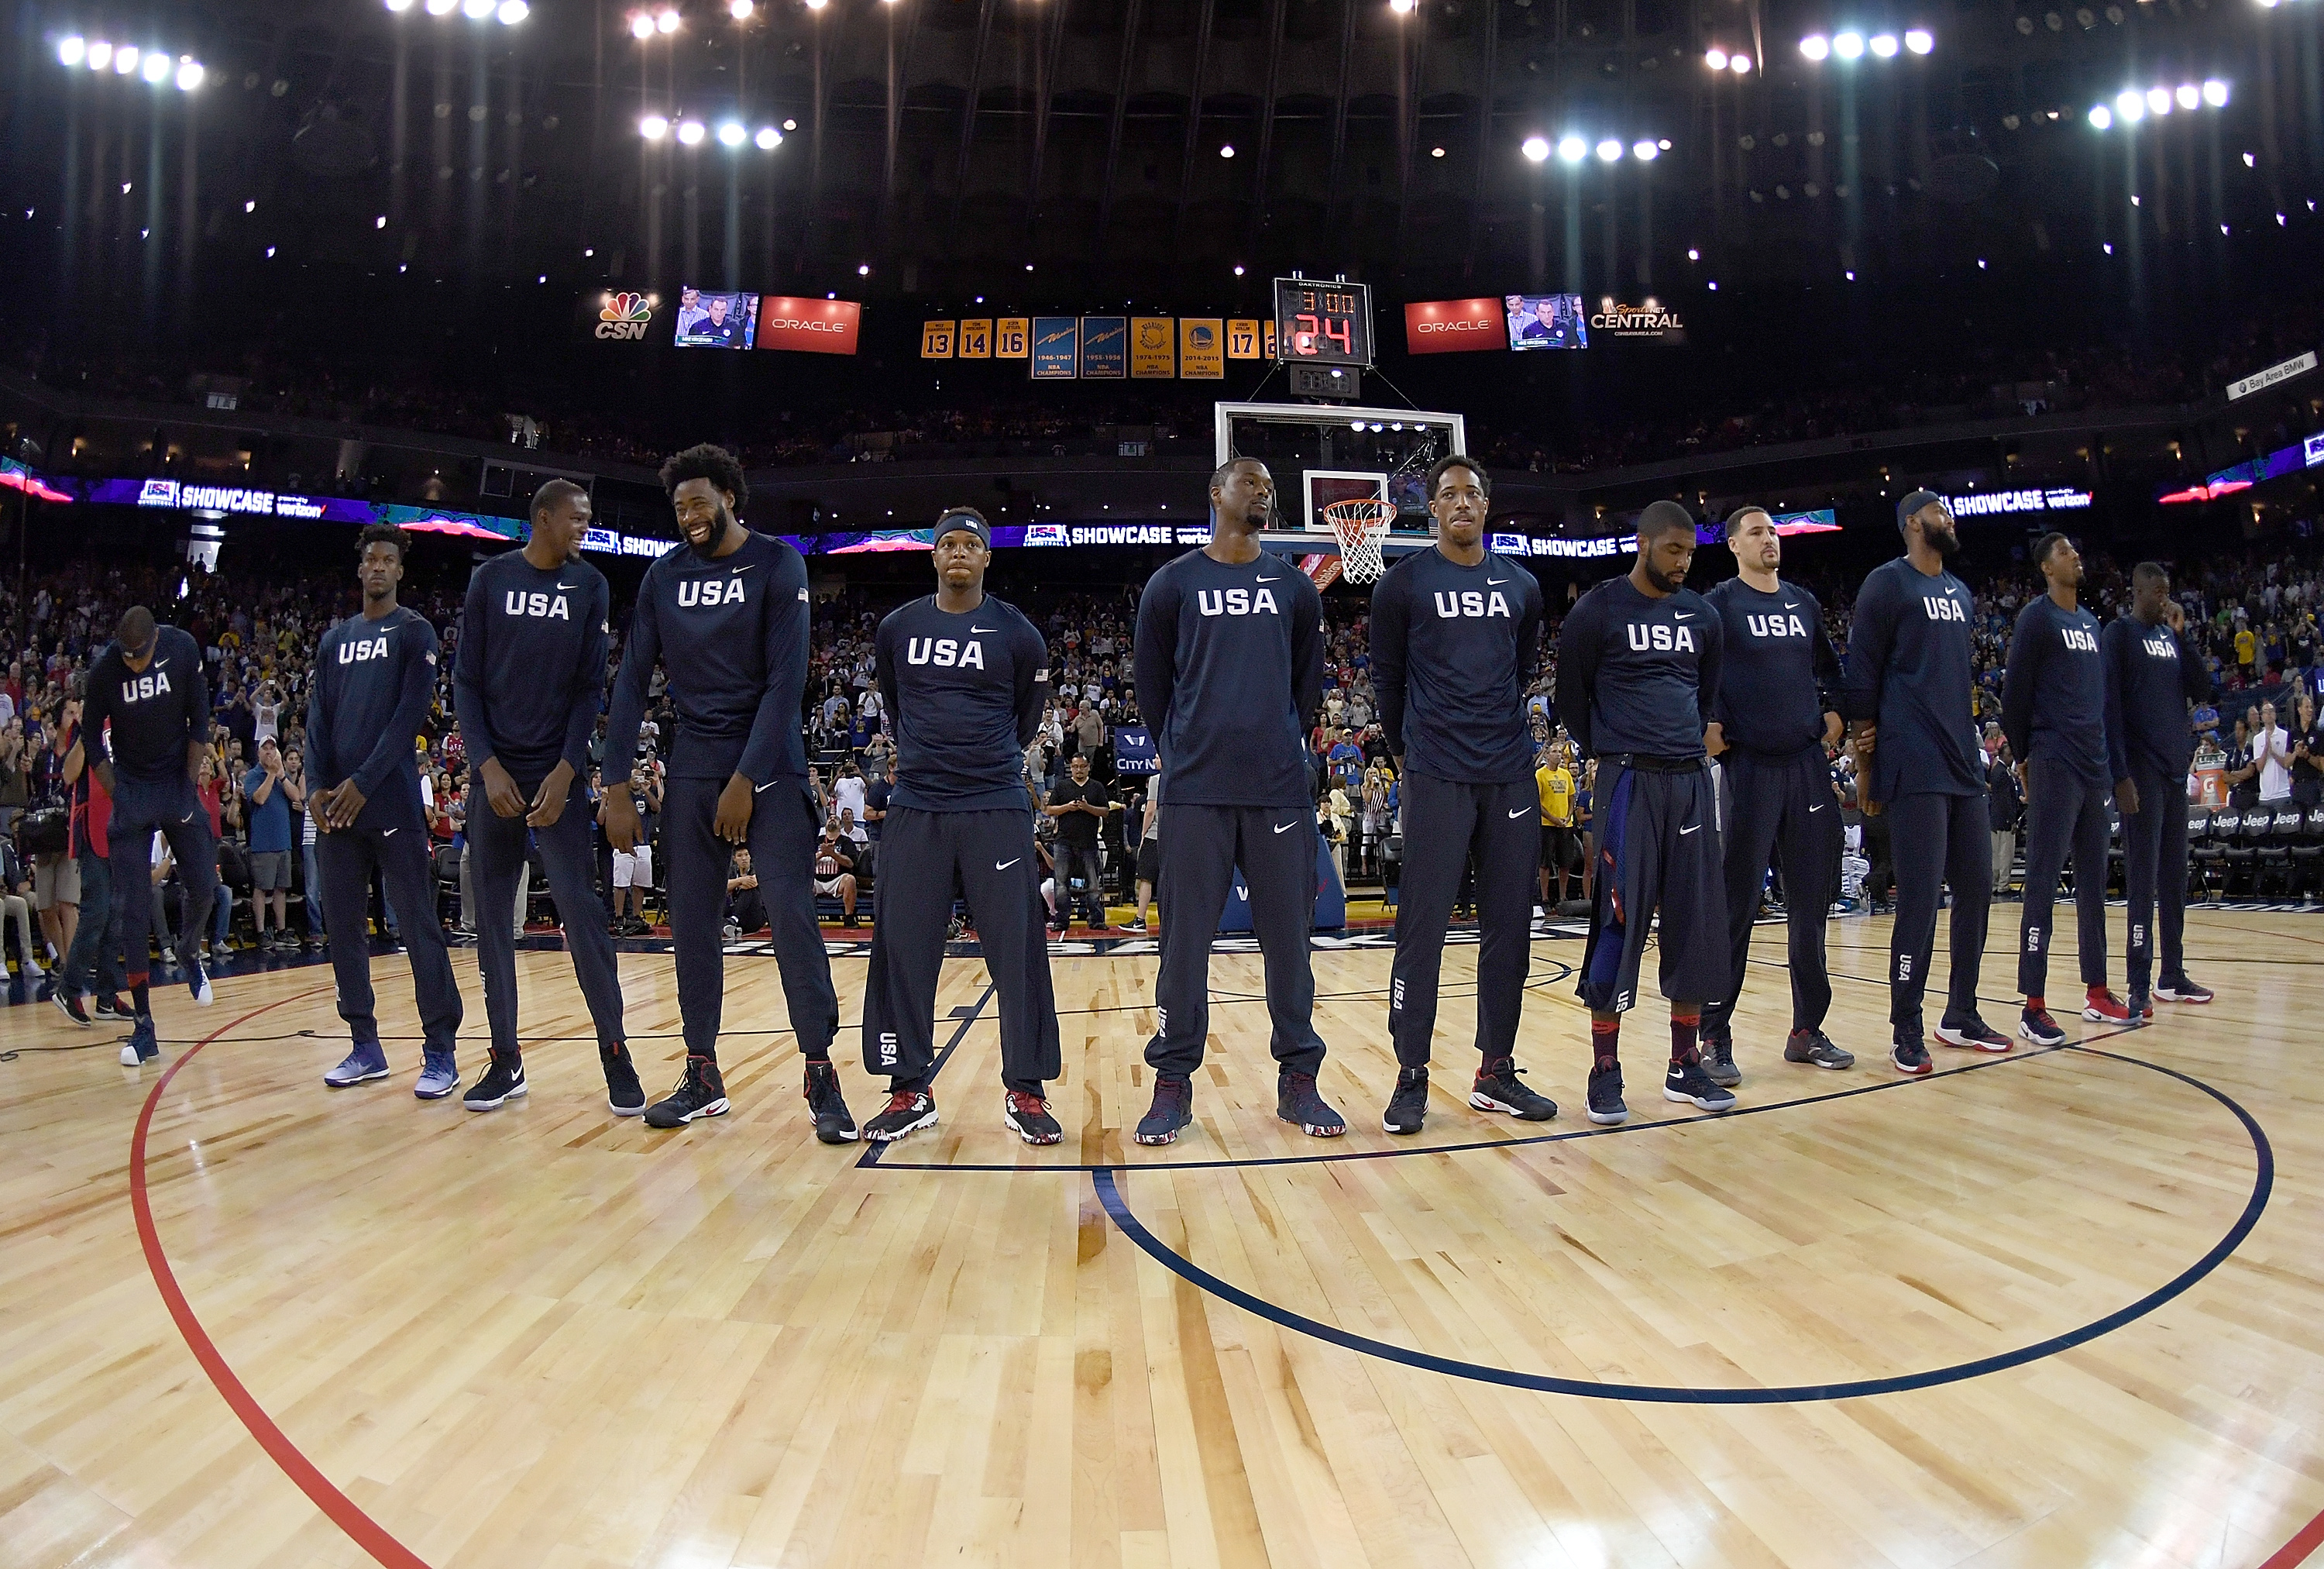 OAKLAND, CA - JULY 26: The United States Men's National Basketball Team stands together during the playing of the National Anthem prior to playing the China Men's National Team in a USA Basketball showcase exhibition game at ORACLE Arena on July 26, 2016 in Oakland, California. Thearon W. Henderson/Getty Images/AFP